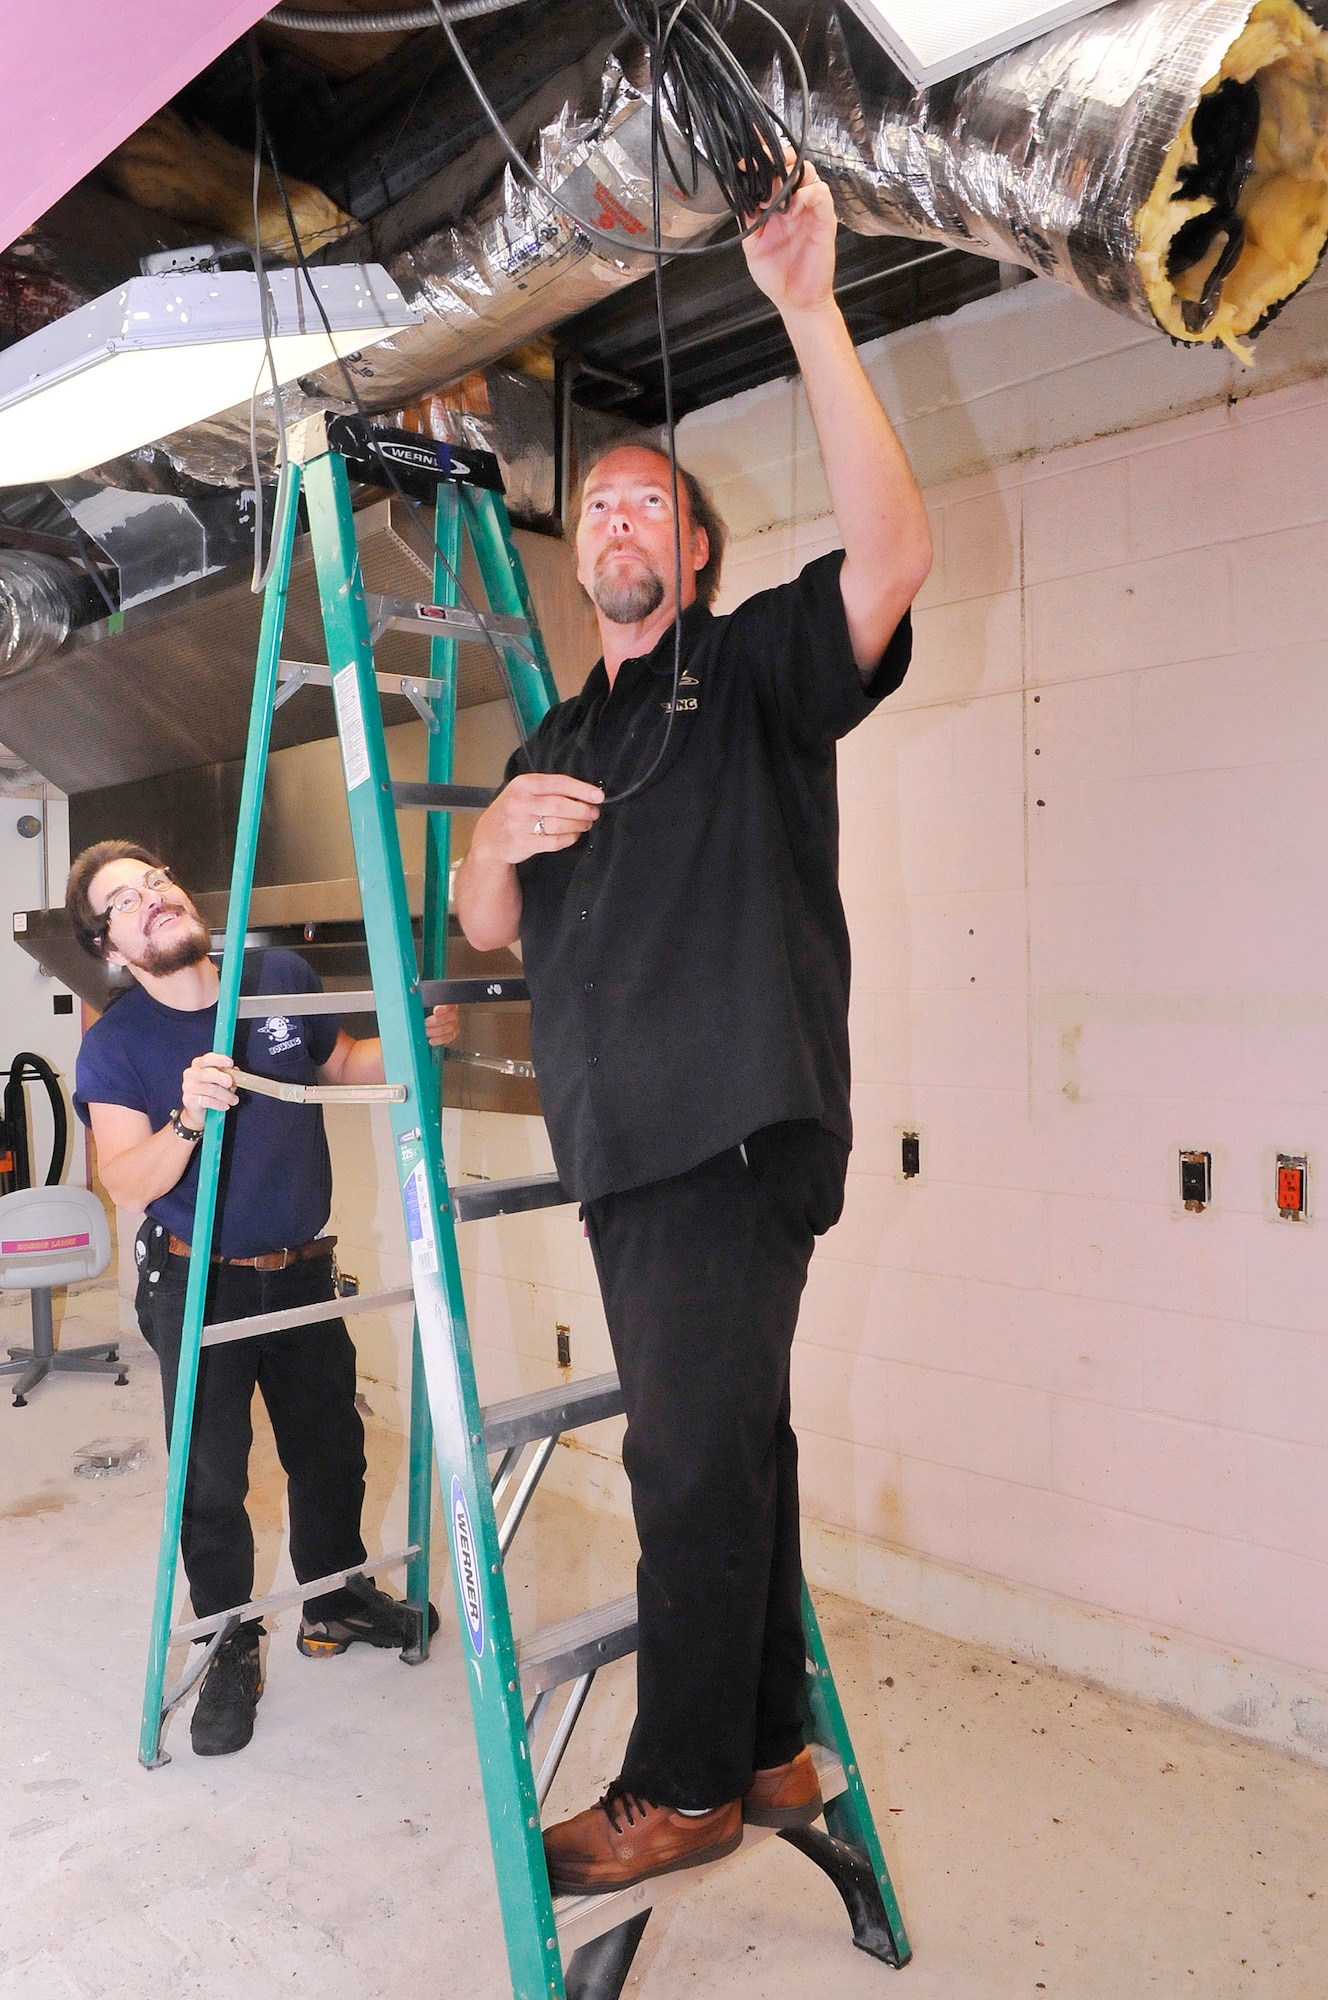 L-R, Fred Babcock, Robins Bowling Center janitorial technician, holds a ladder for Rick Catlett, maintenance manager, to check on some cable during renovation of On Spot Cafe at the Robins Bowling Center. (U. S. Air Force photo/Sue Sapp)